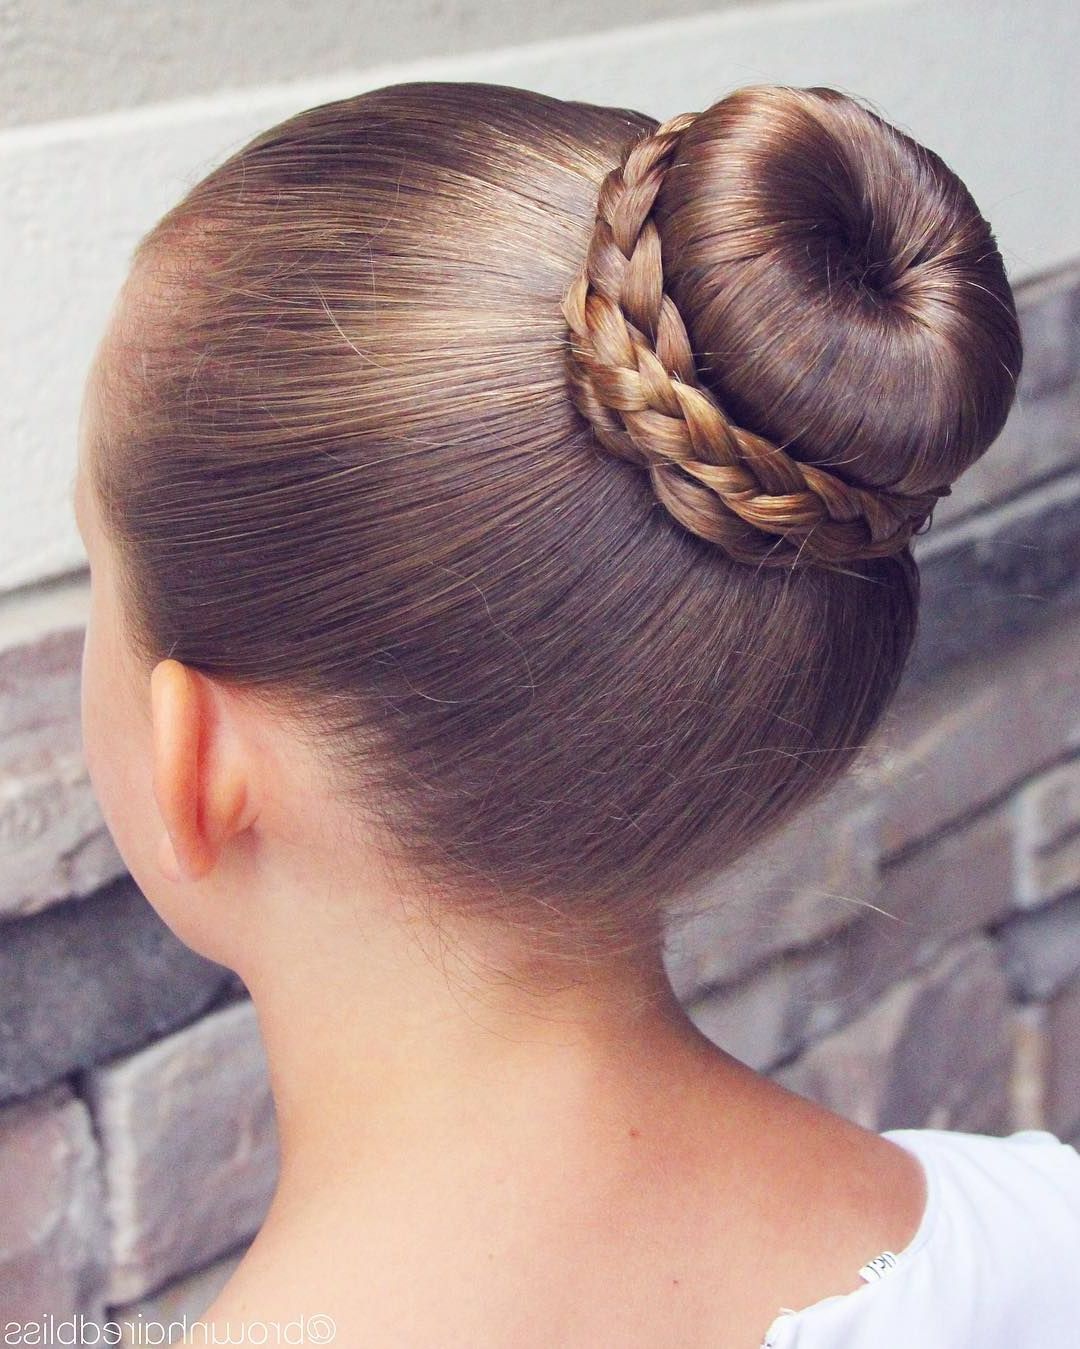 Pin On Exercise With Well Known Braided Ballerina Bun Hairstyles (View 1 of 20)